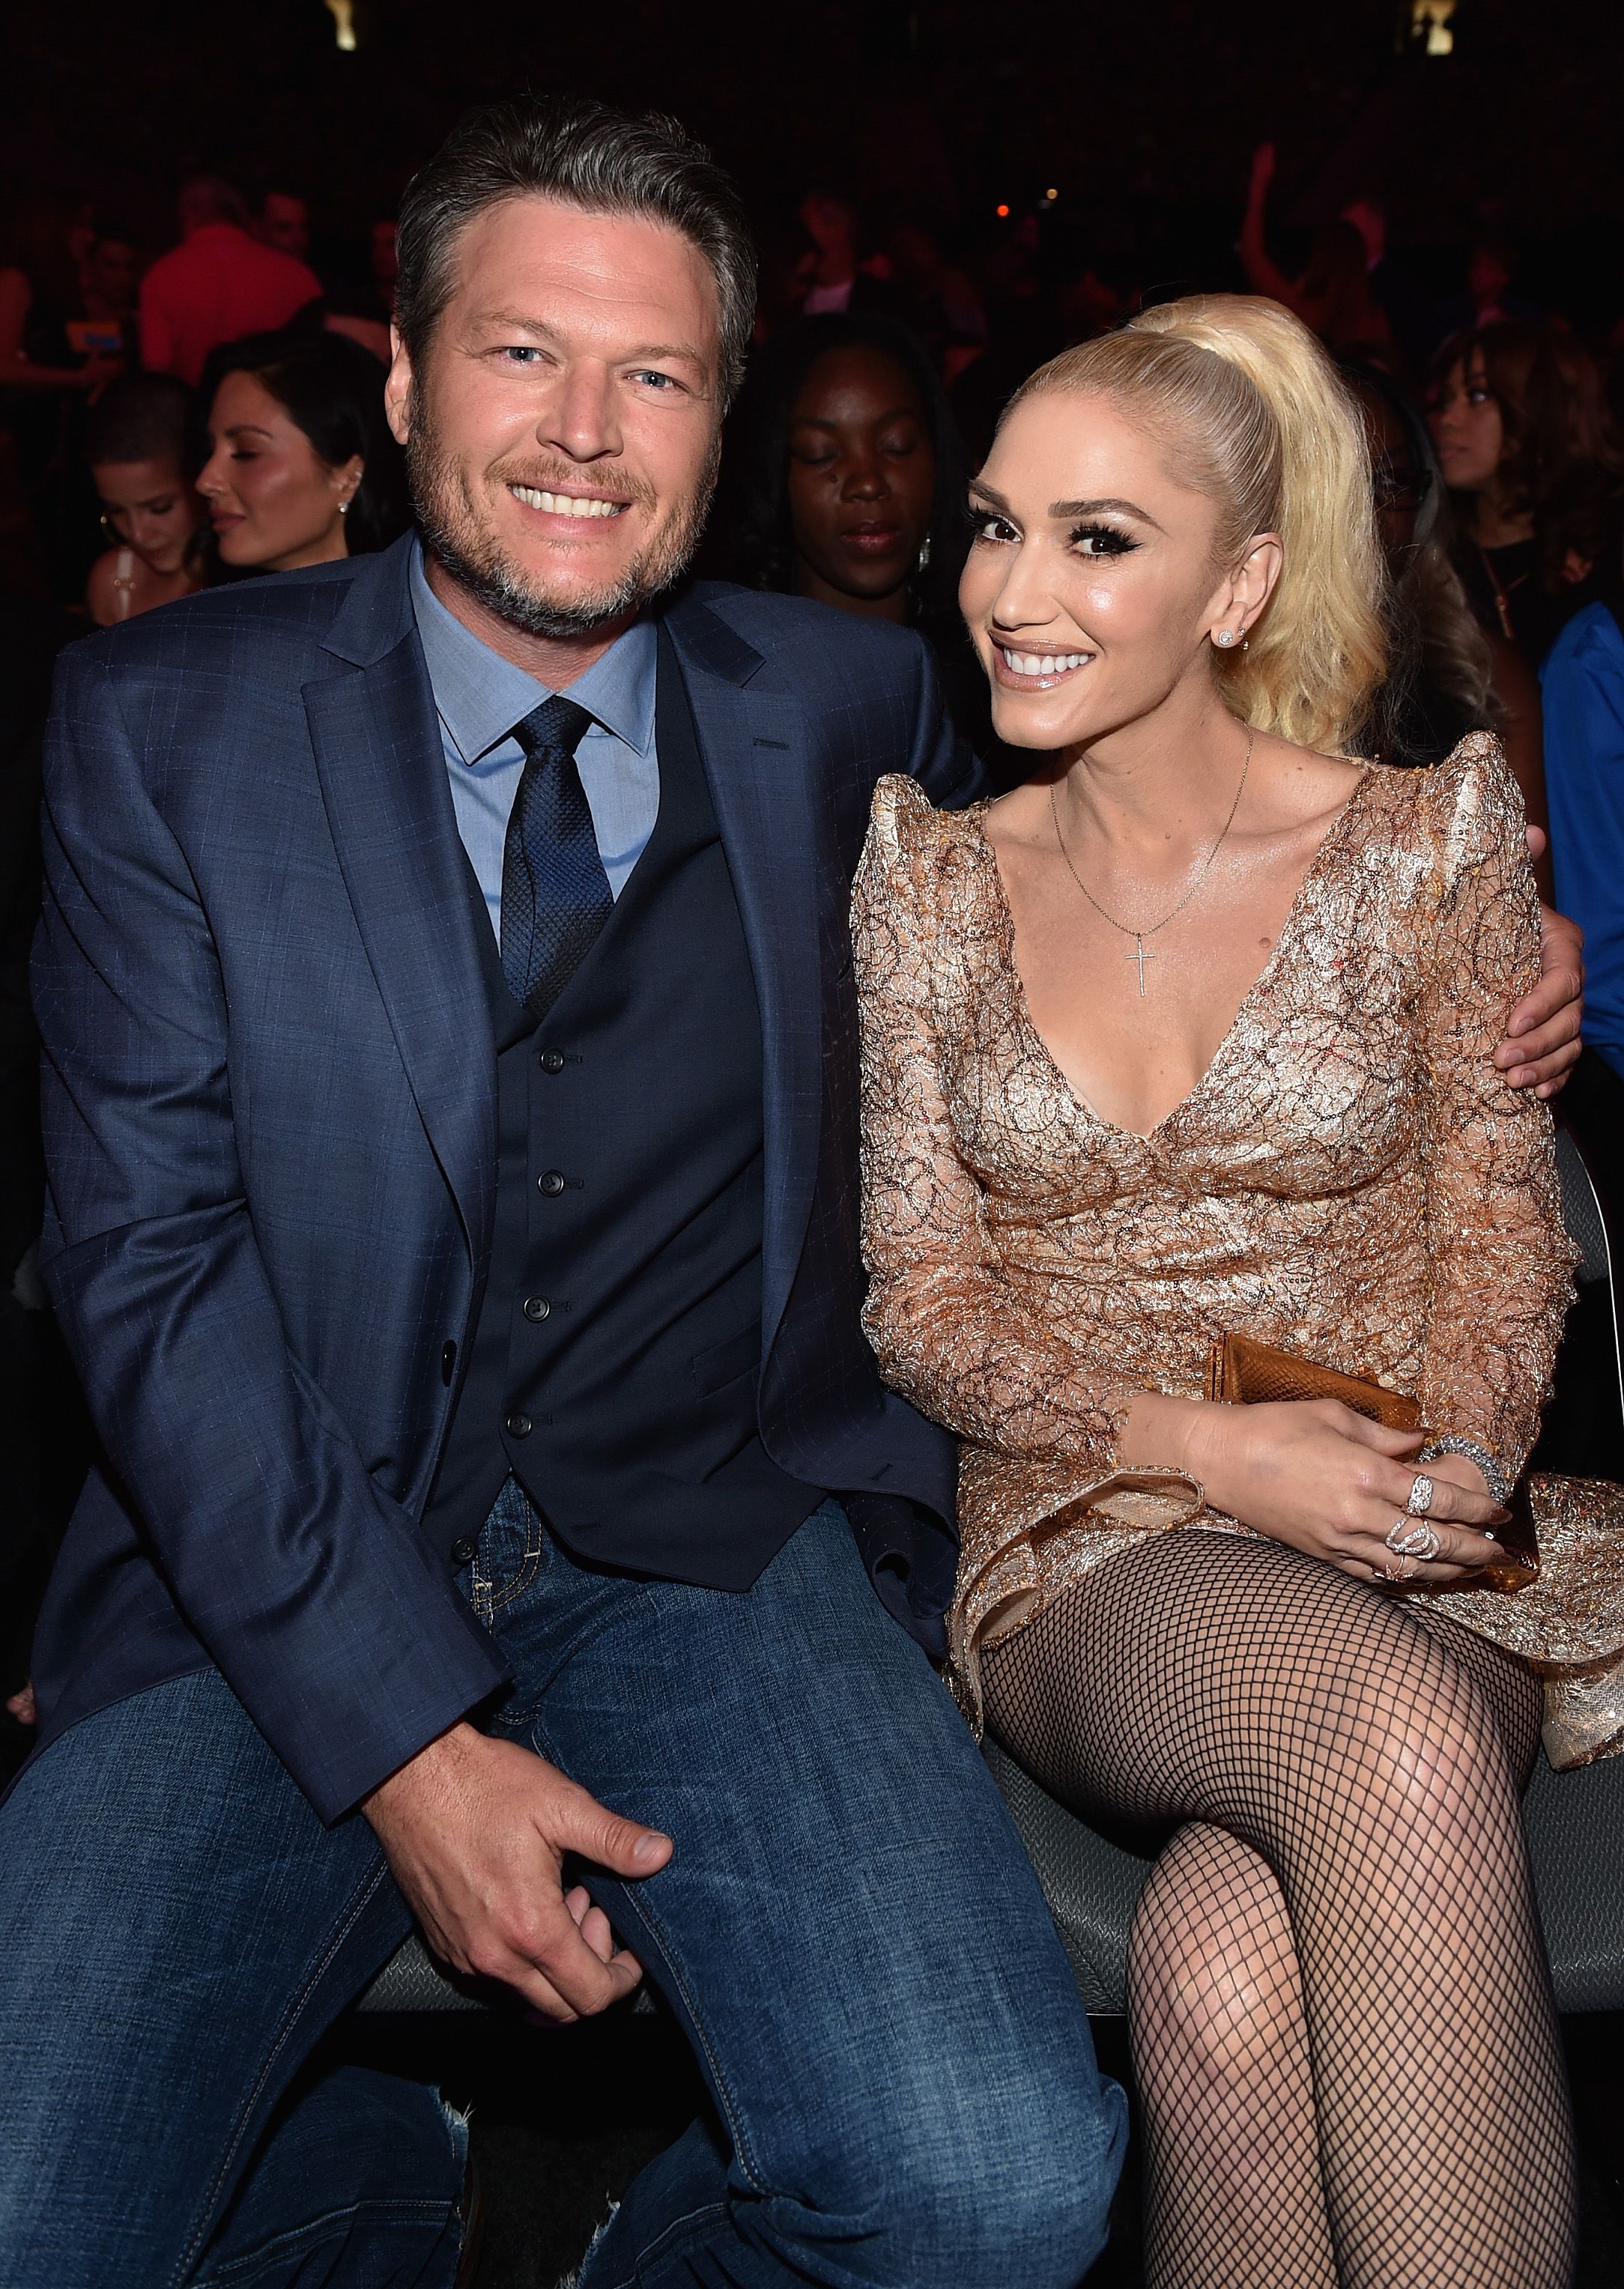 Why Blake Shelton and Gwen Stefani Havent Married pic pic